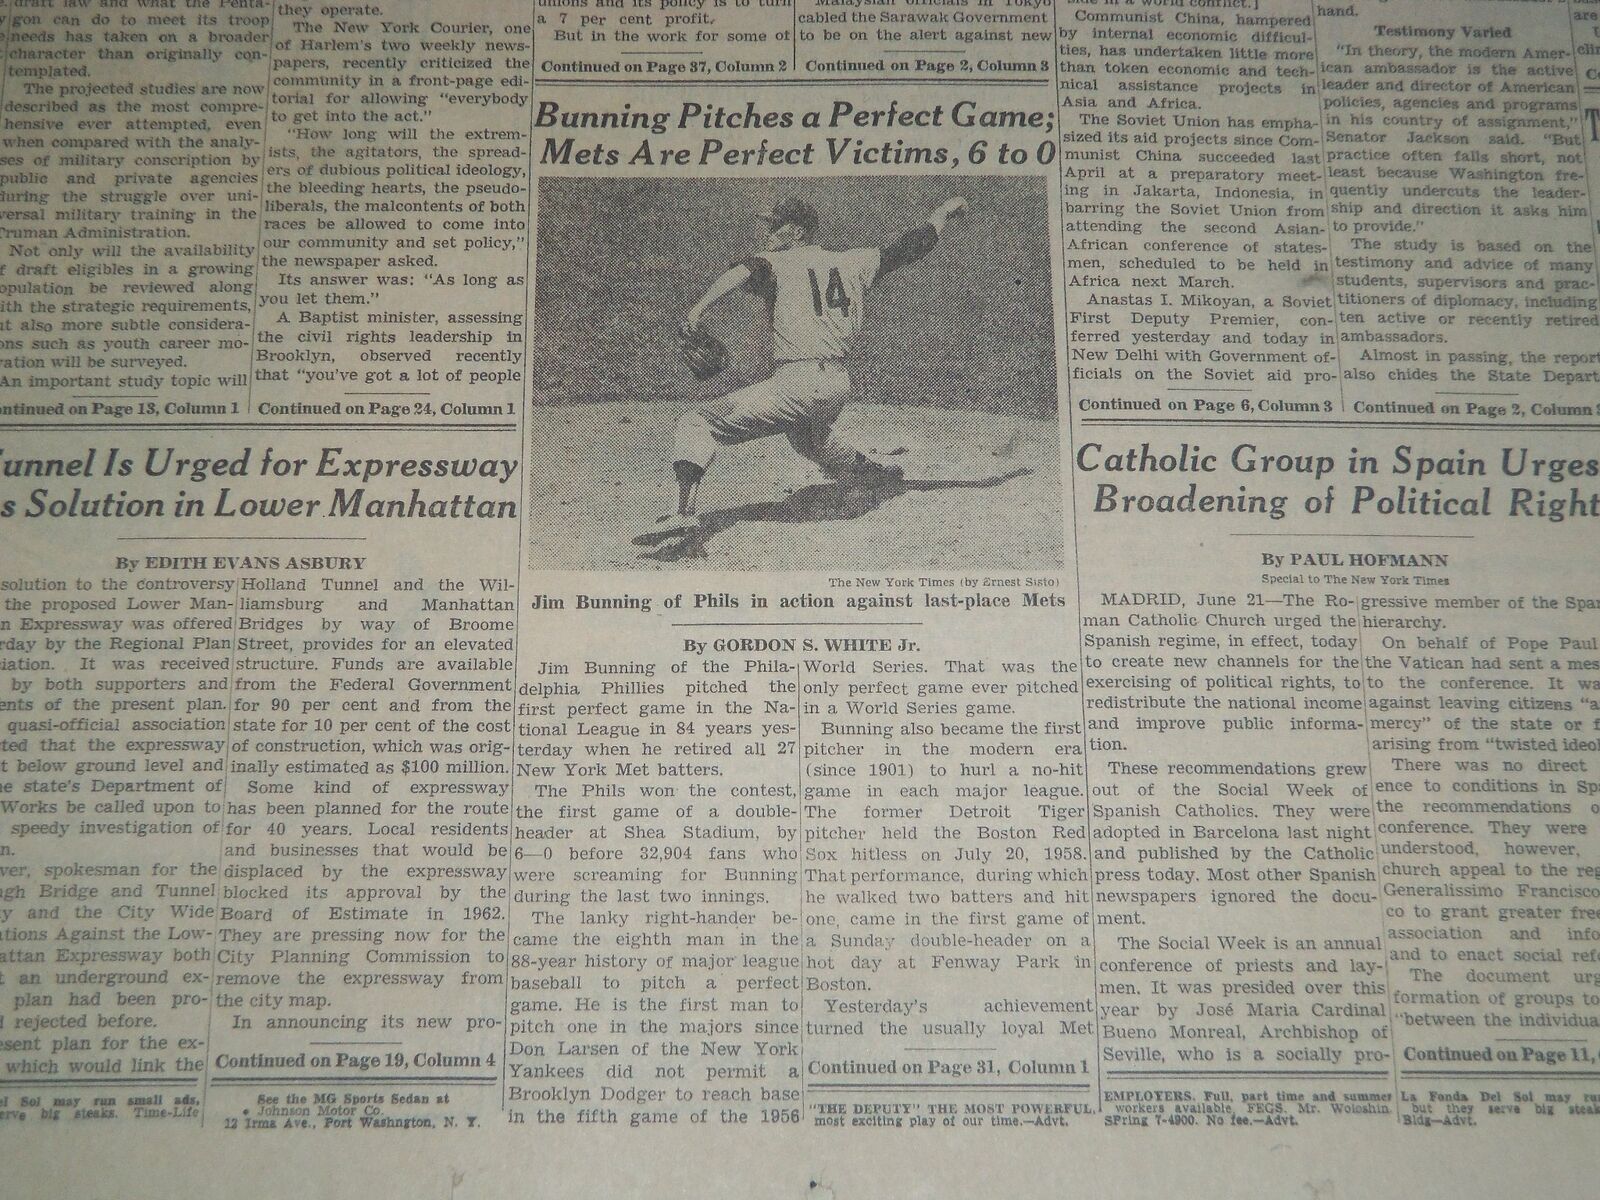 1964 JUNE 22 NEW YORK TIMES NEWSPAPER - BUNNING PITCHES PERFECT GAME - NP 7432